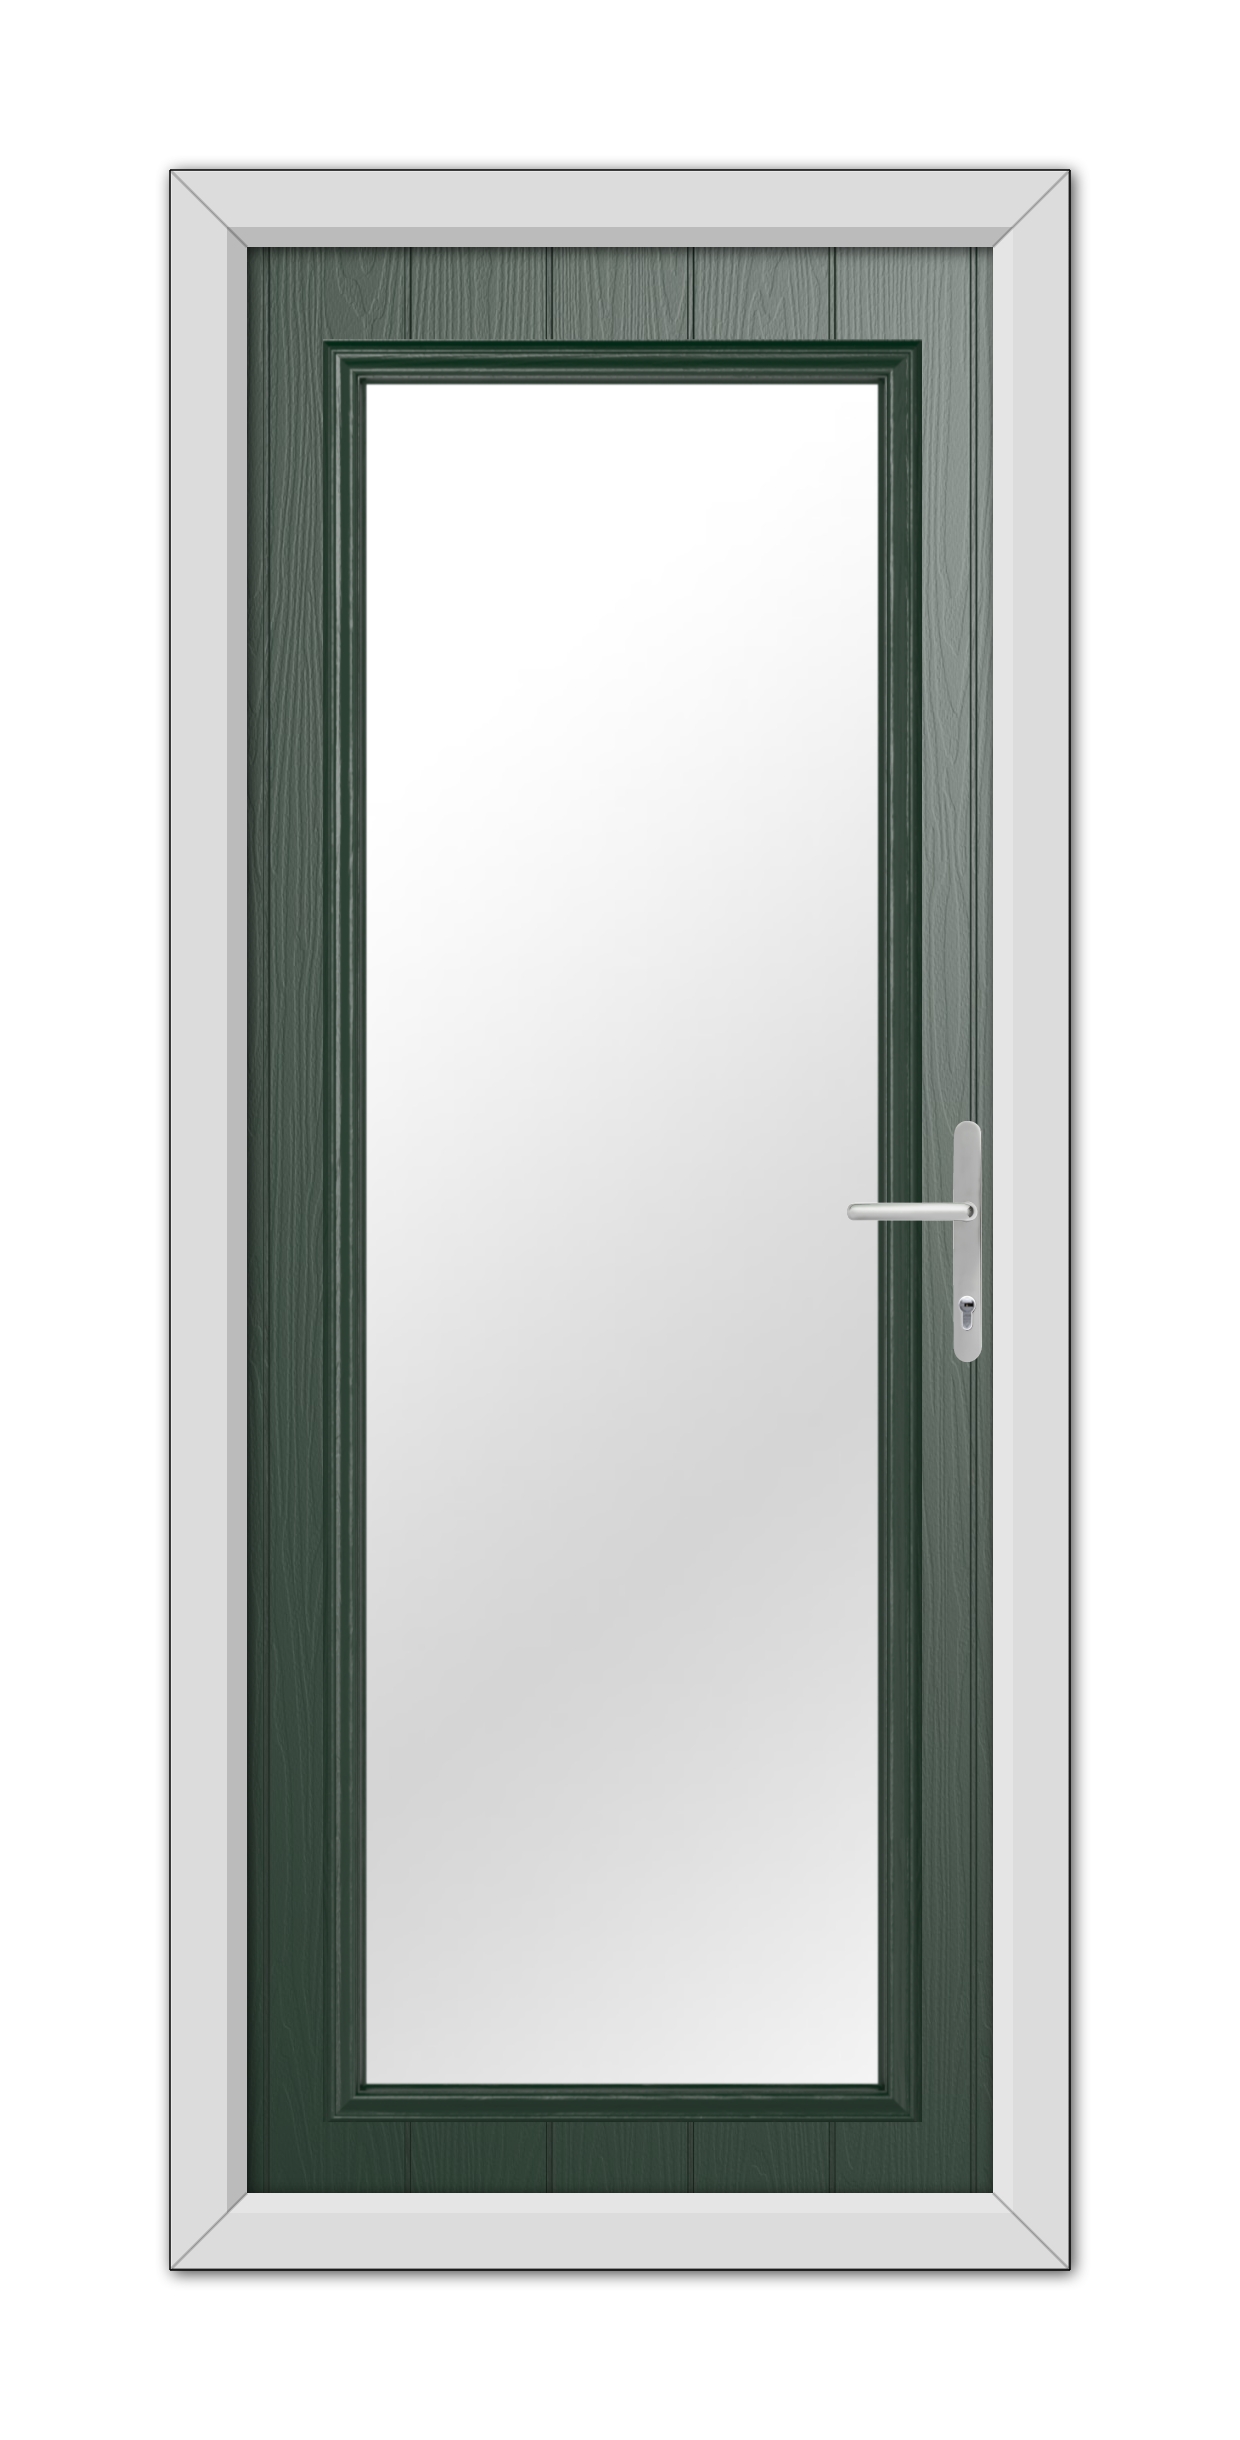 A modern Green Hatton Composite Door 48mm Timber Core with a vertical glass panel and a white metal handle, set within a white frame.